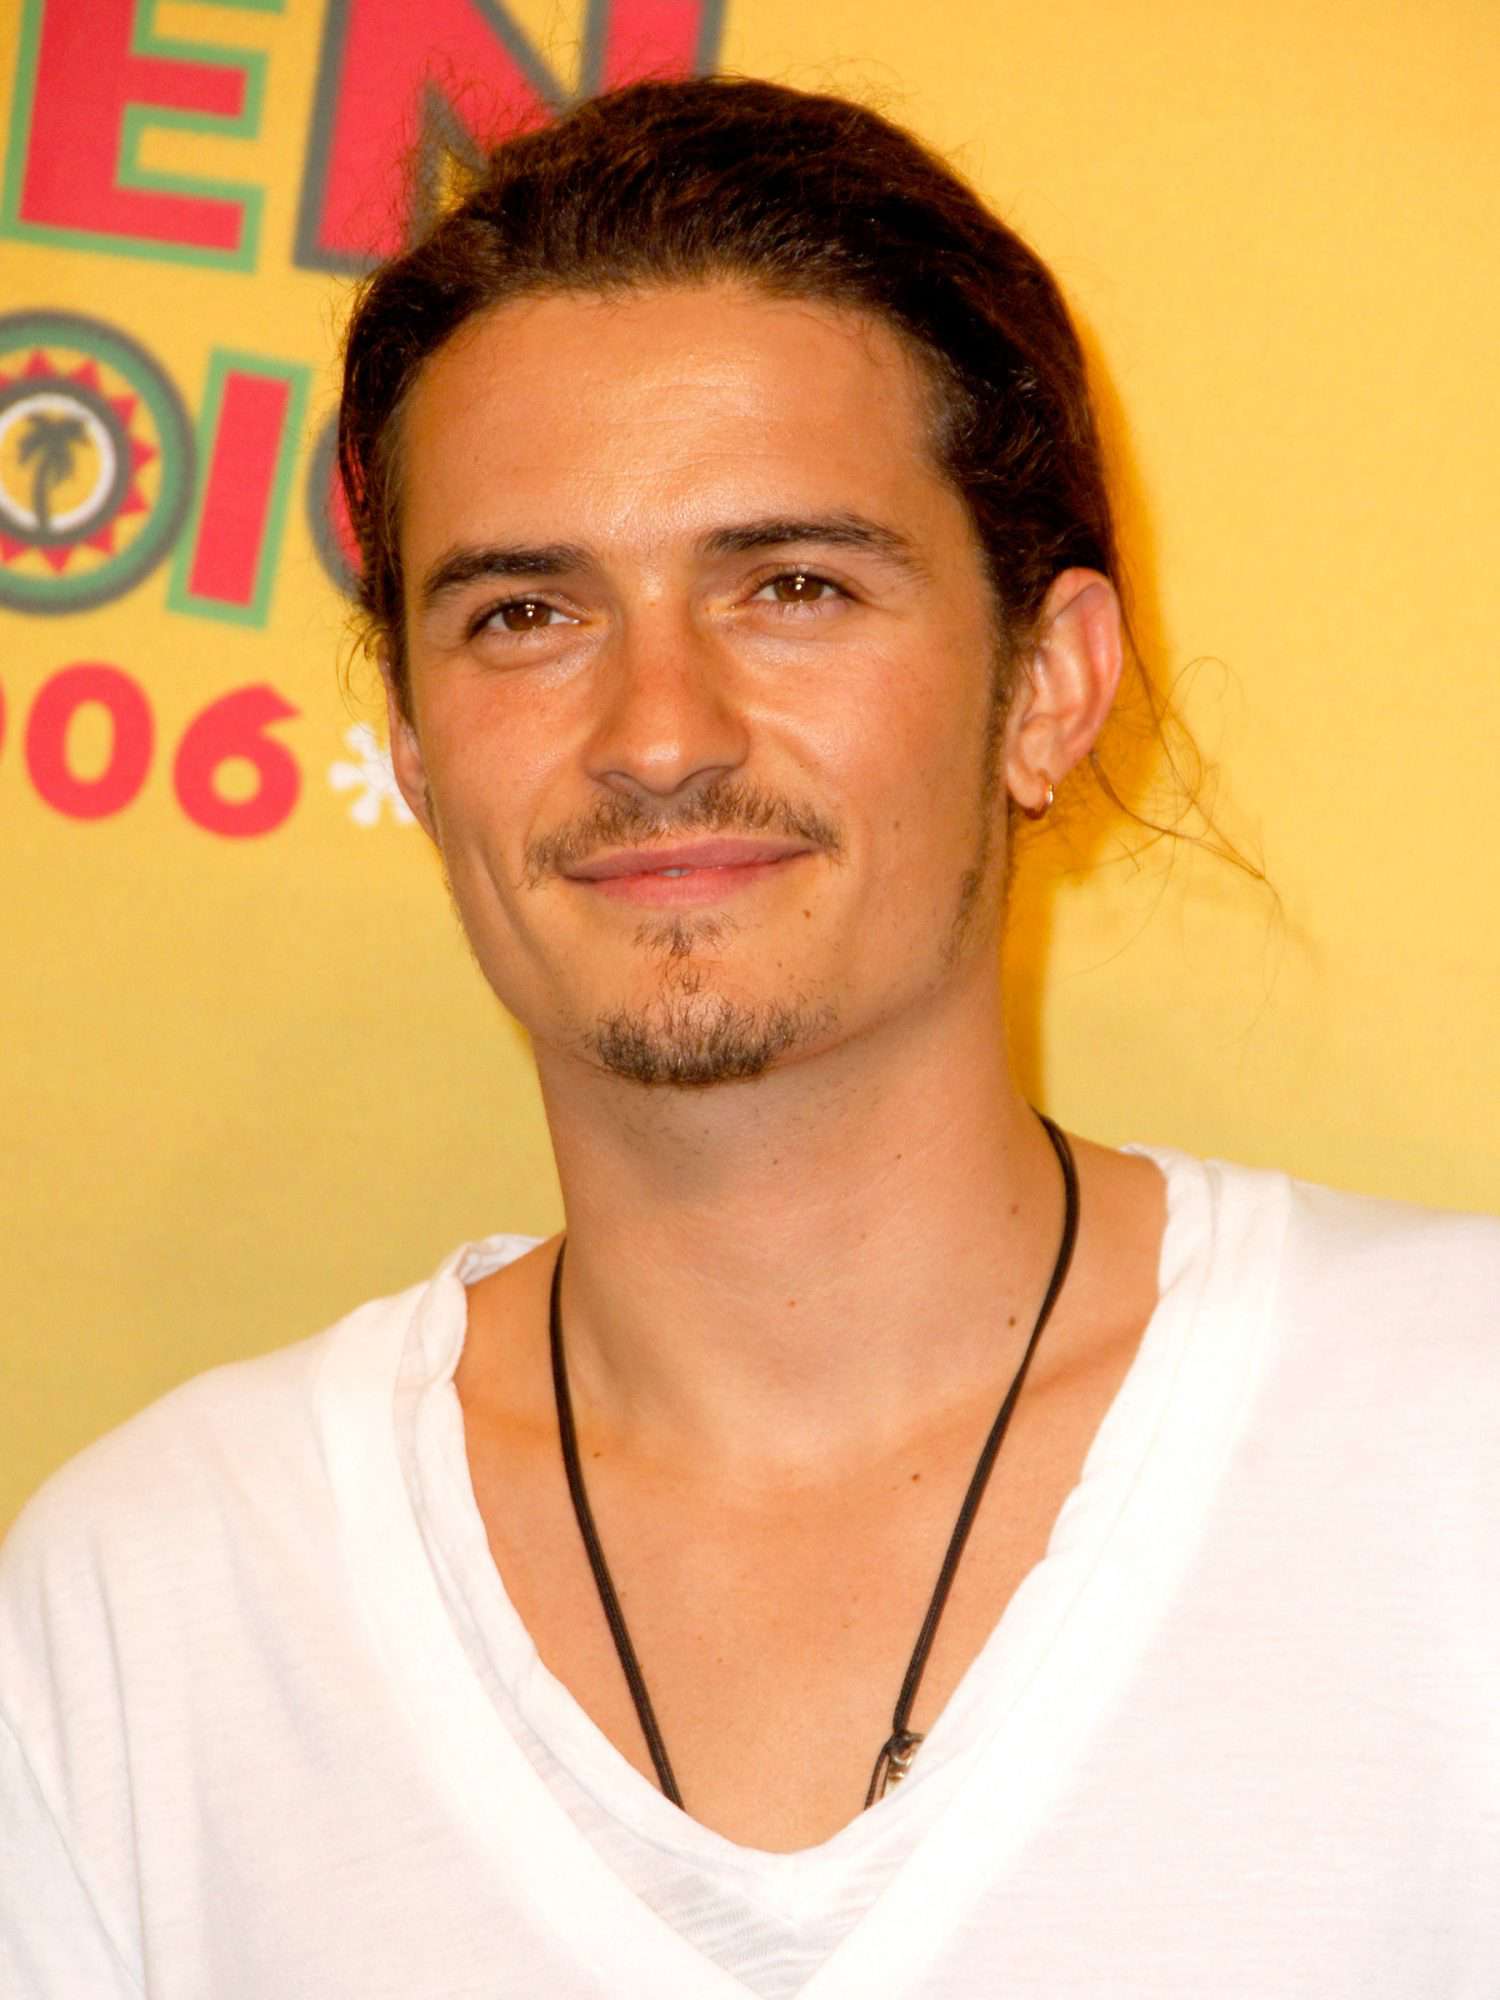 Orlando Bloom&nbsp;at the 2006 Teen Choice Awards in California on August 20, 2006